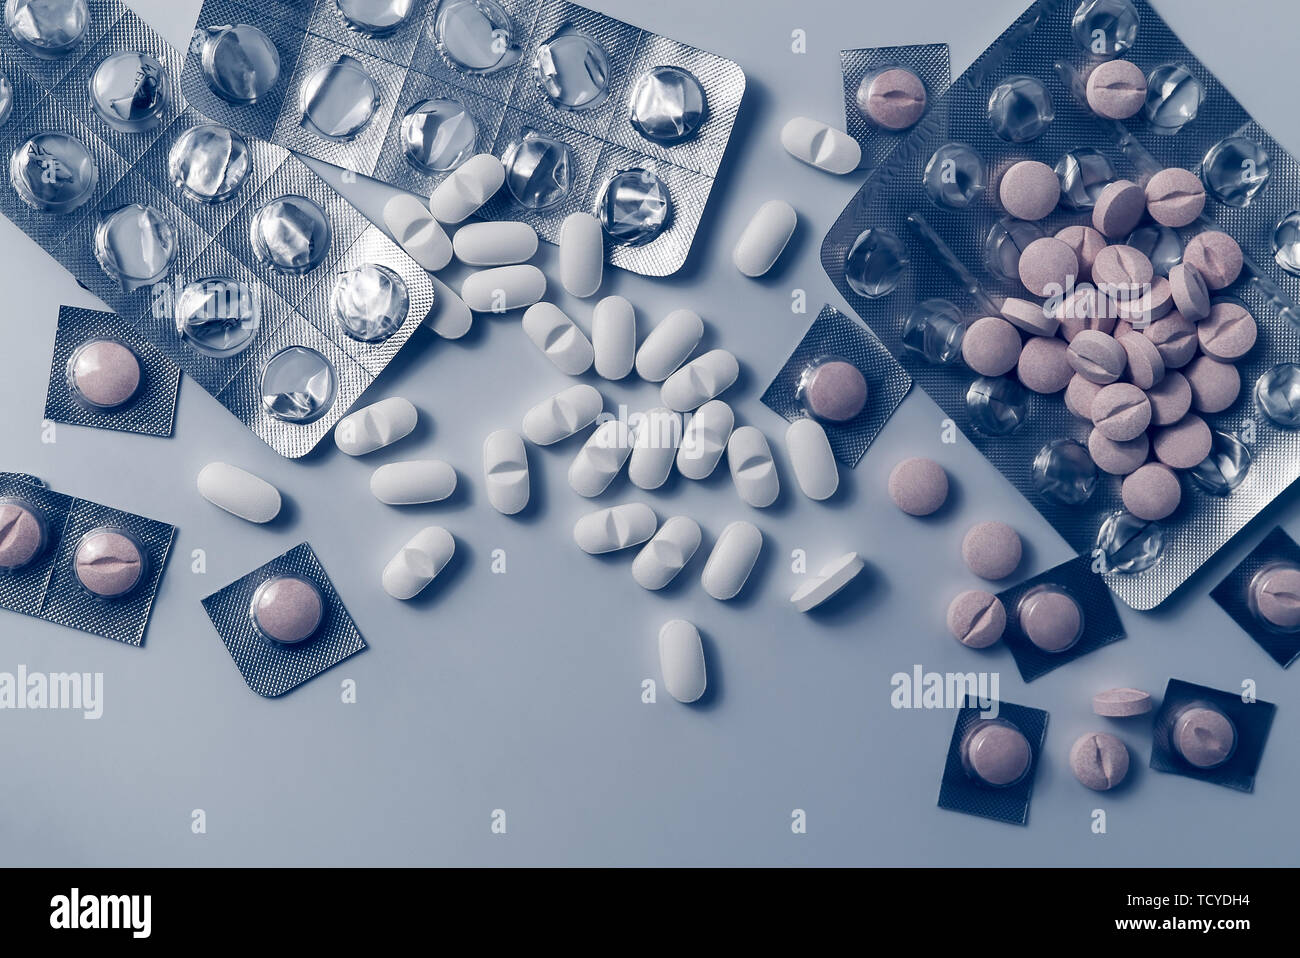 Top view of many prescription drugs, medicine tablets or vitamin pills and empty blister packs in blue color tone - Concept of opioids healthcare Stock Photo